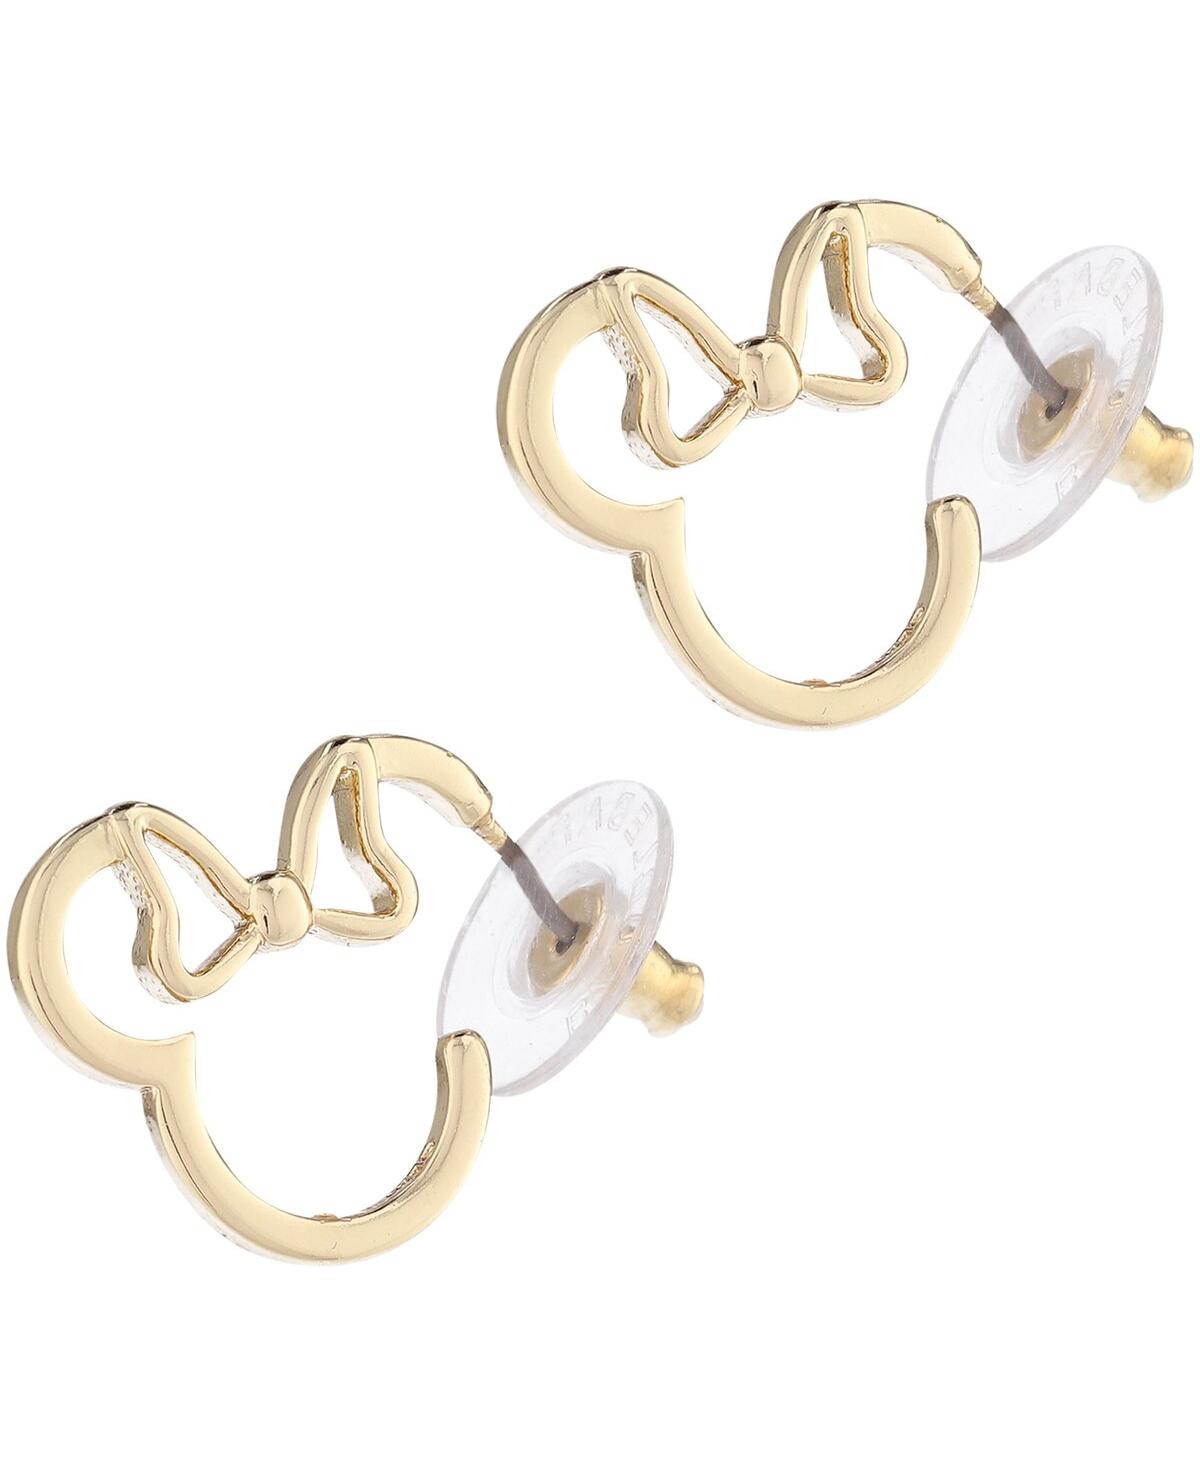 Women's Minnie Mouse Outline Earrings - Gold